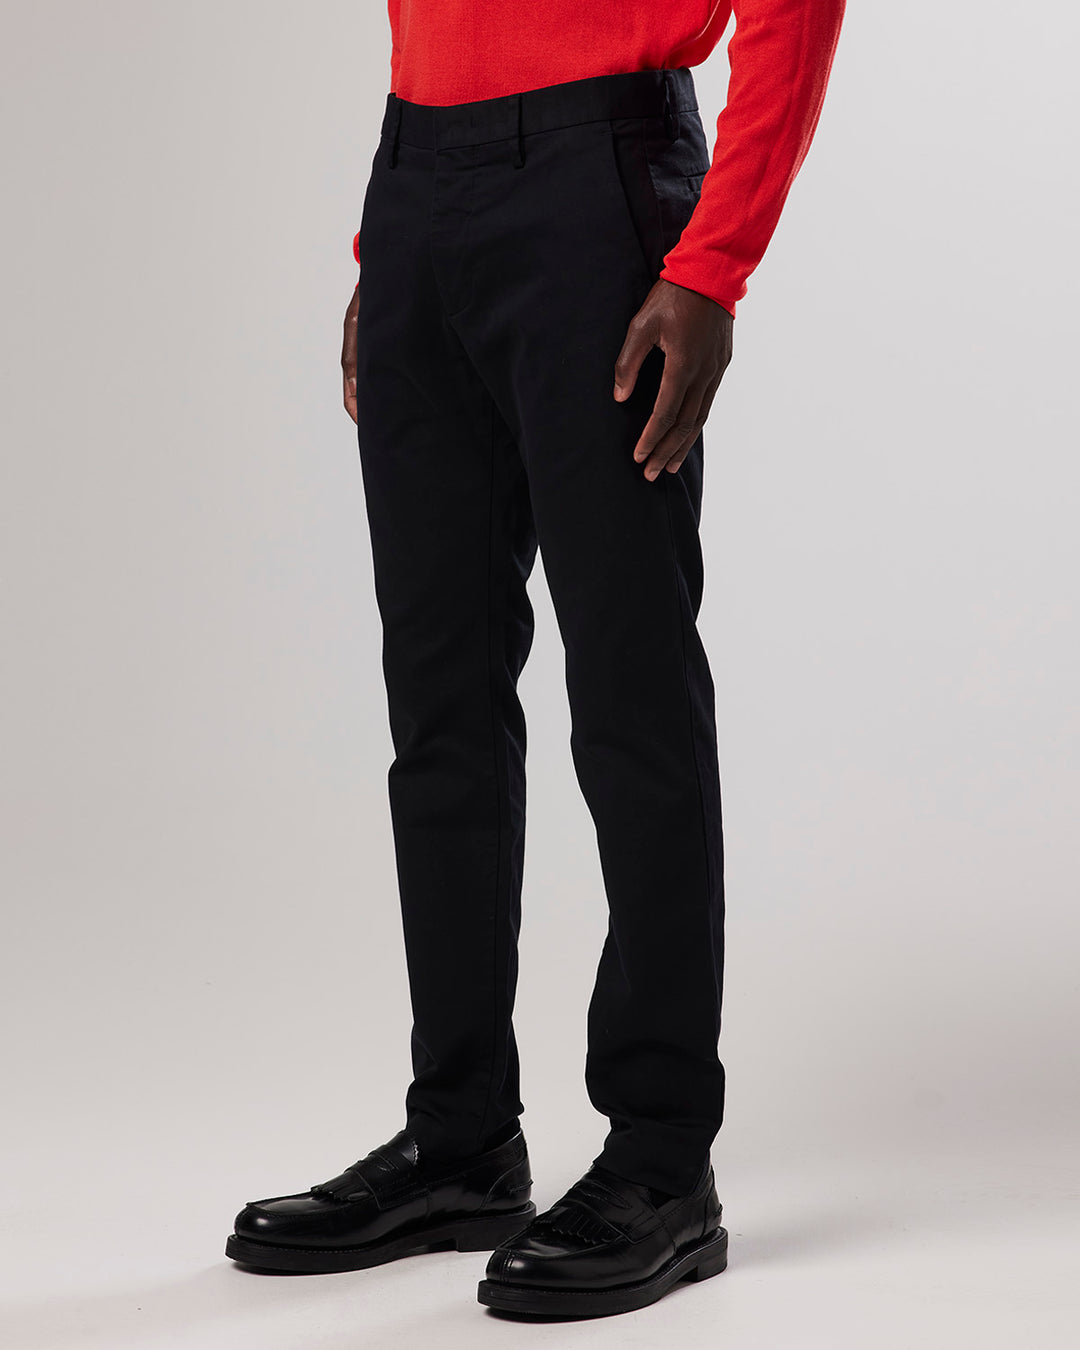 NN07 - Theo 1420 Pant in Black | Buster McGee